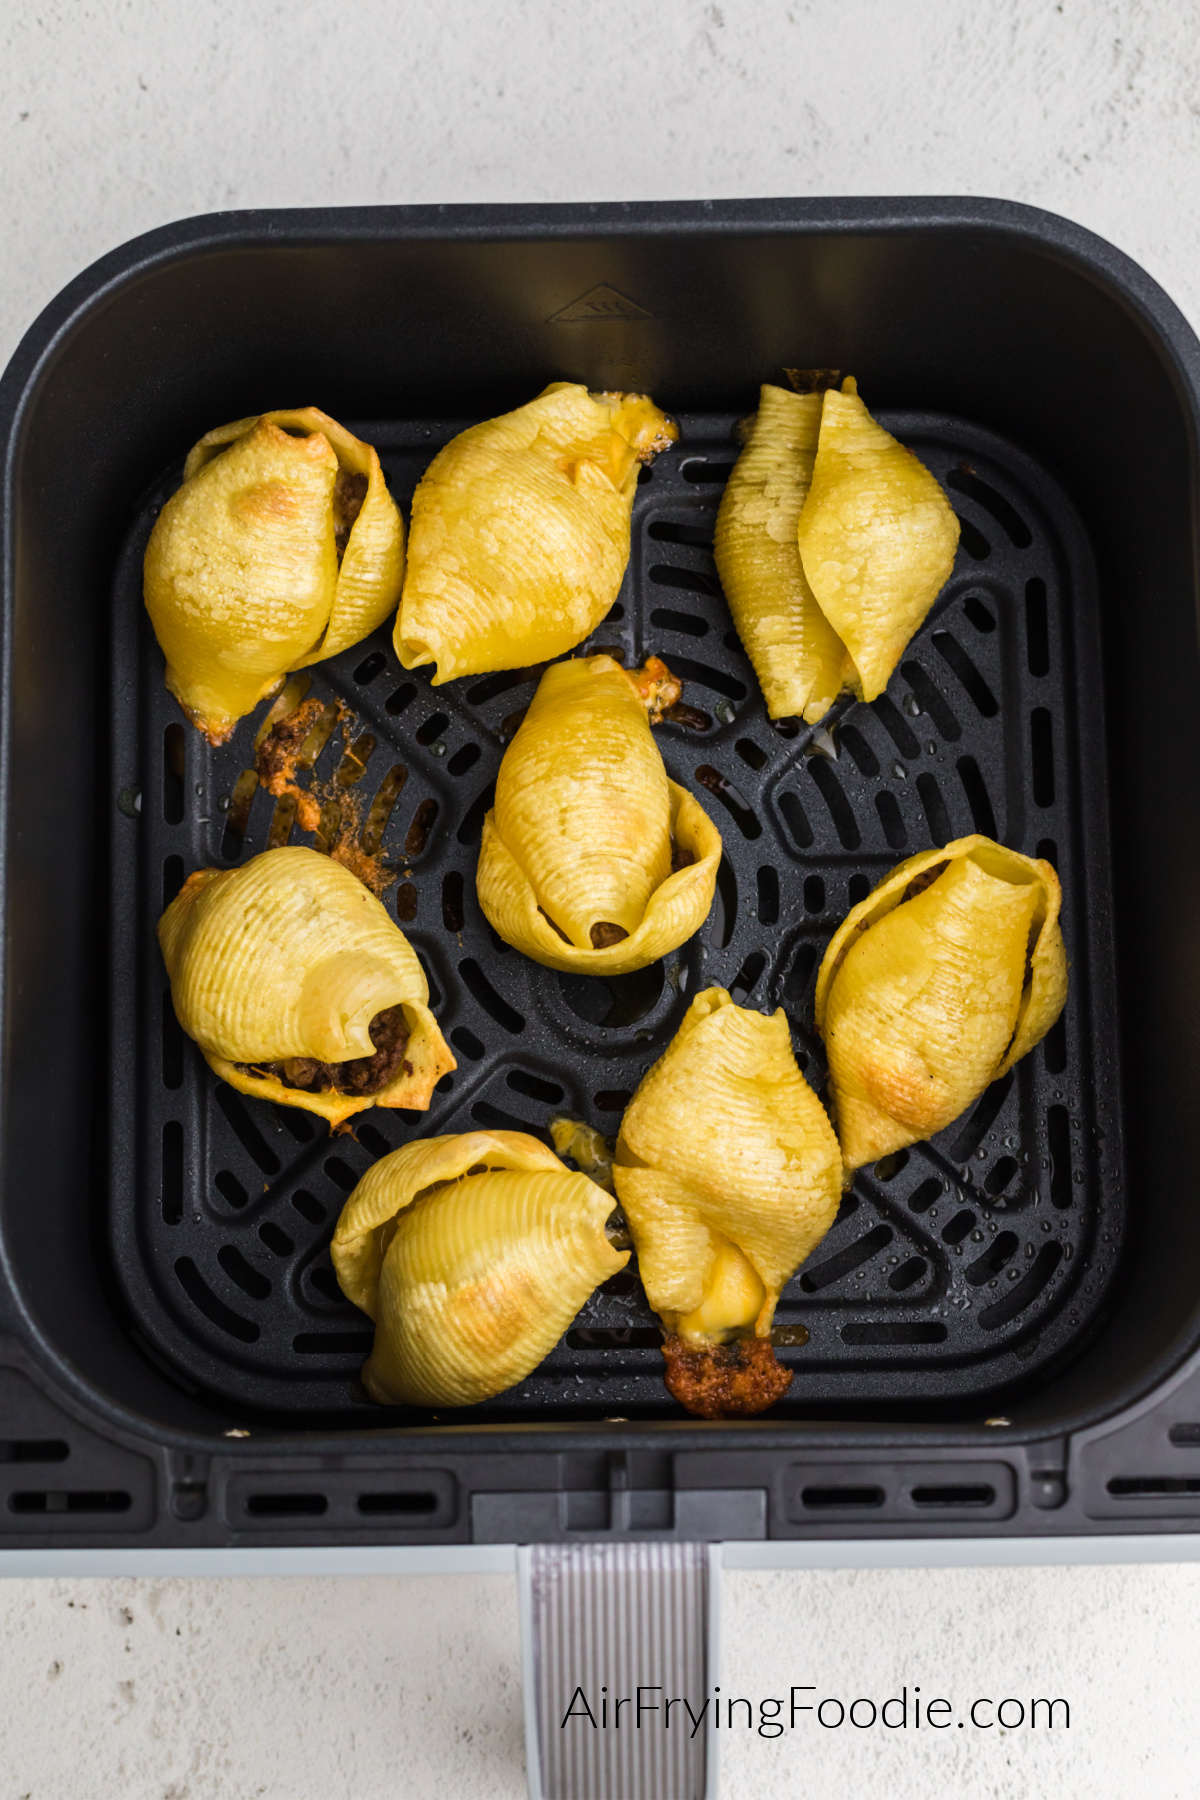 Air fried Taco Stuffed shells in the basket of the air fryer.